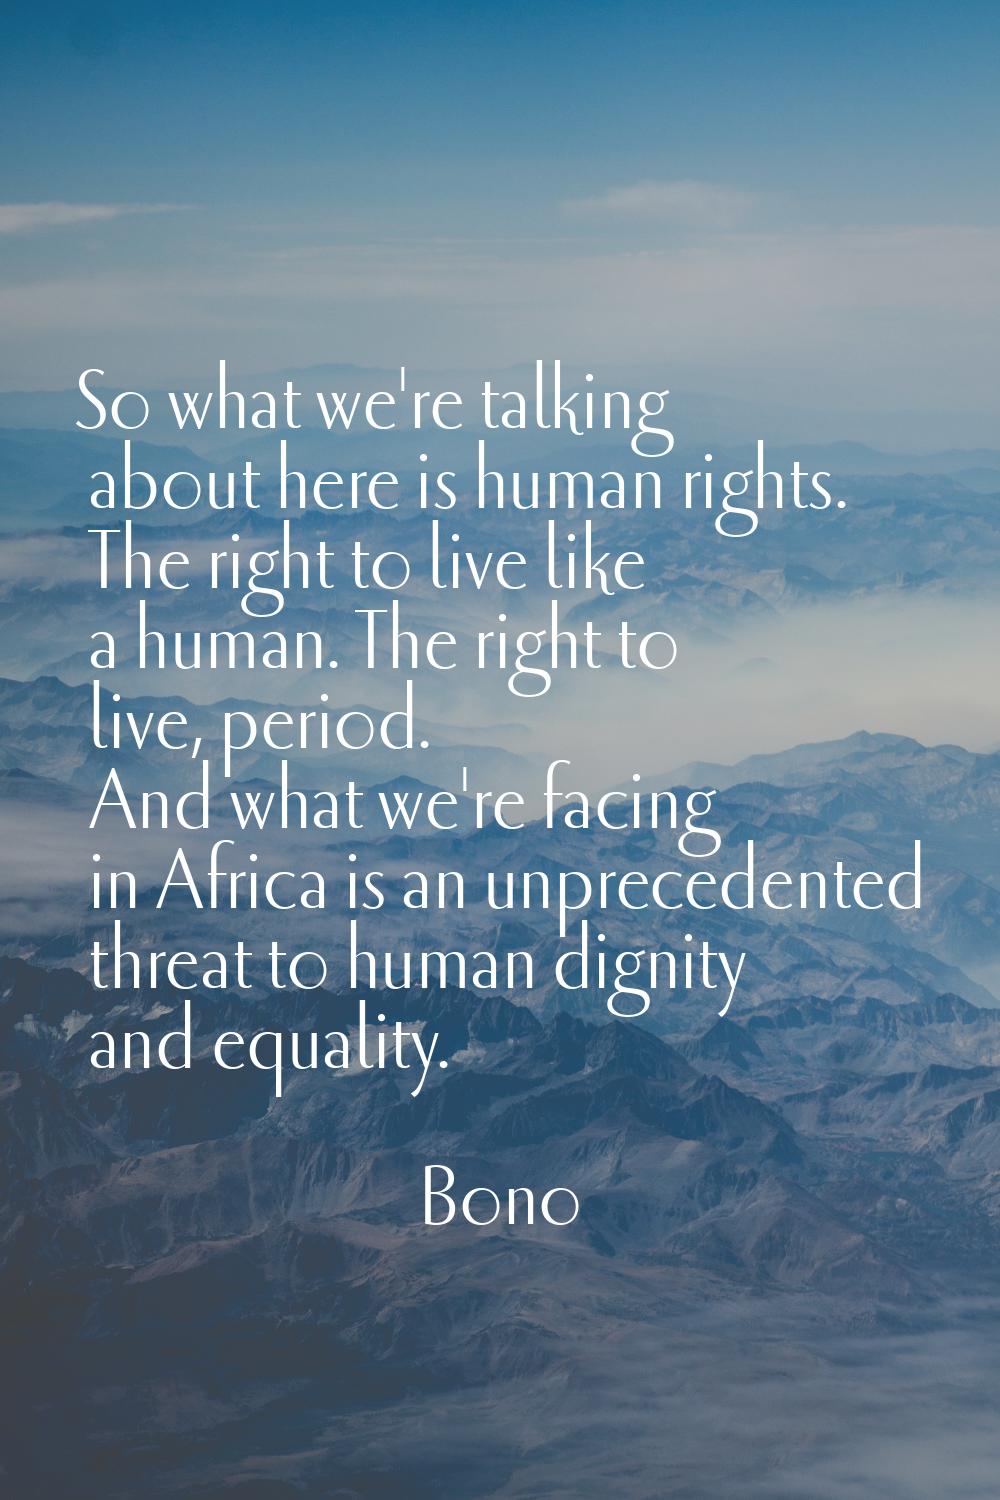 So what we're talking about here is human rights. The right to live like a human. The right to live